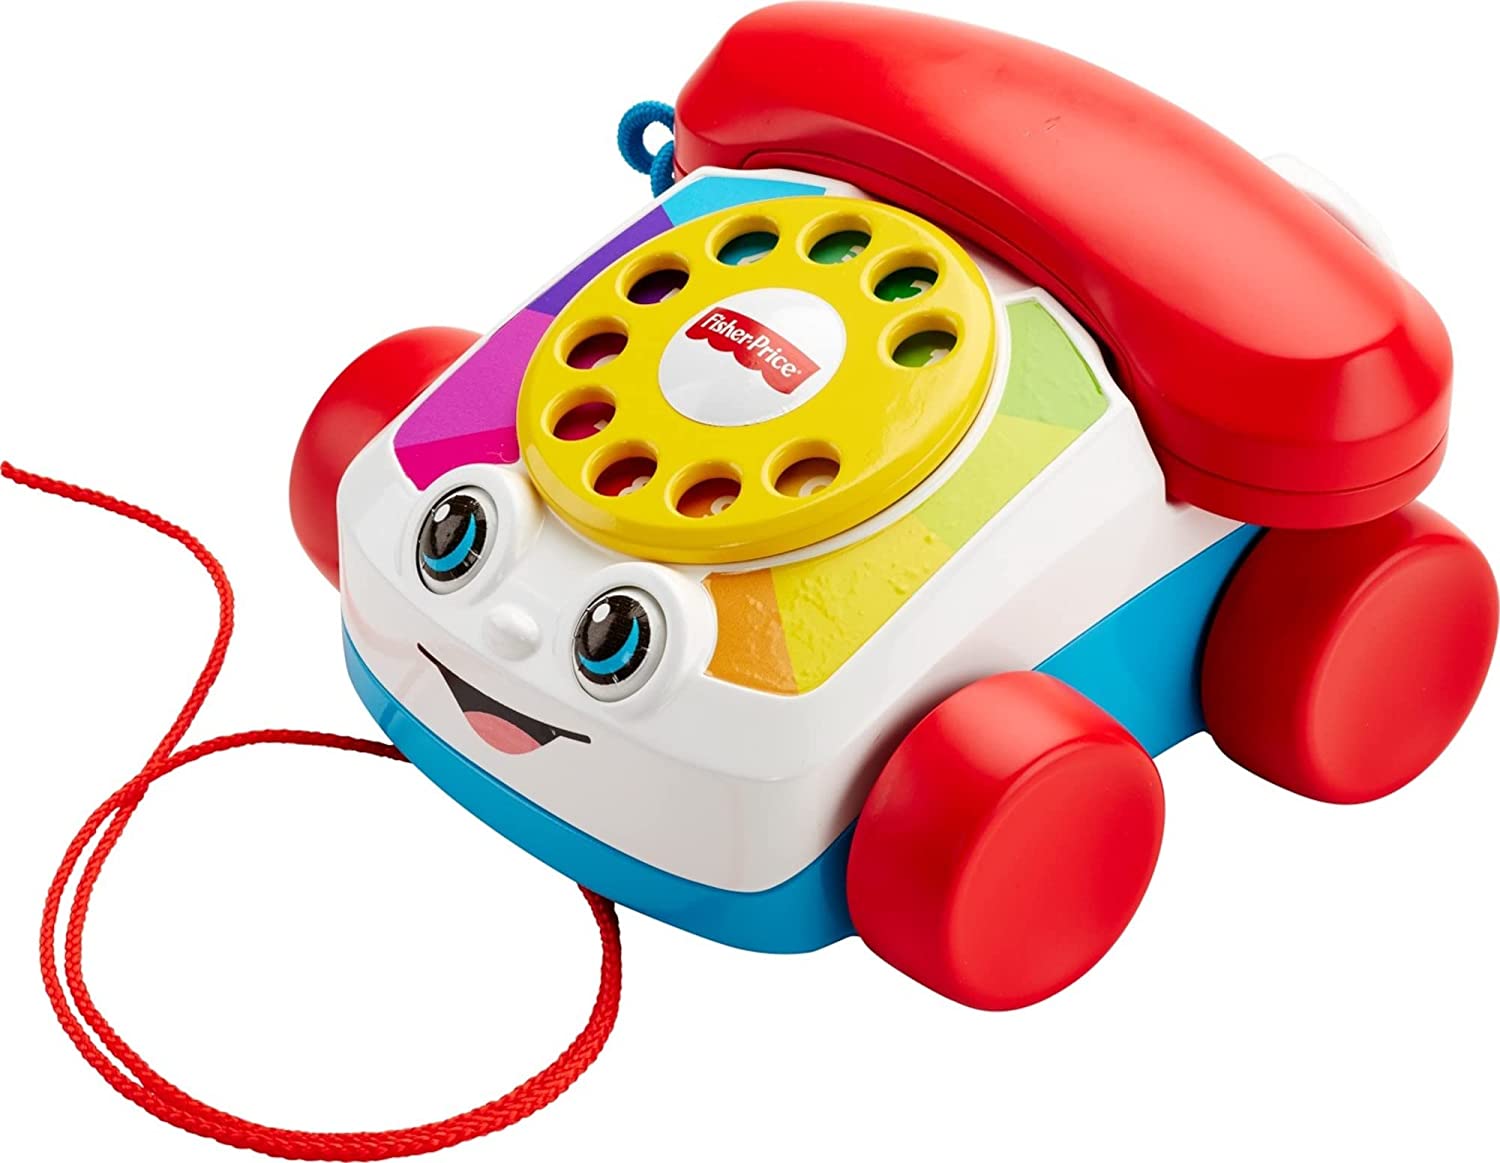 Rotary phone for kids. 